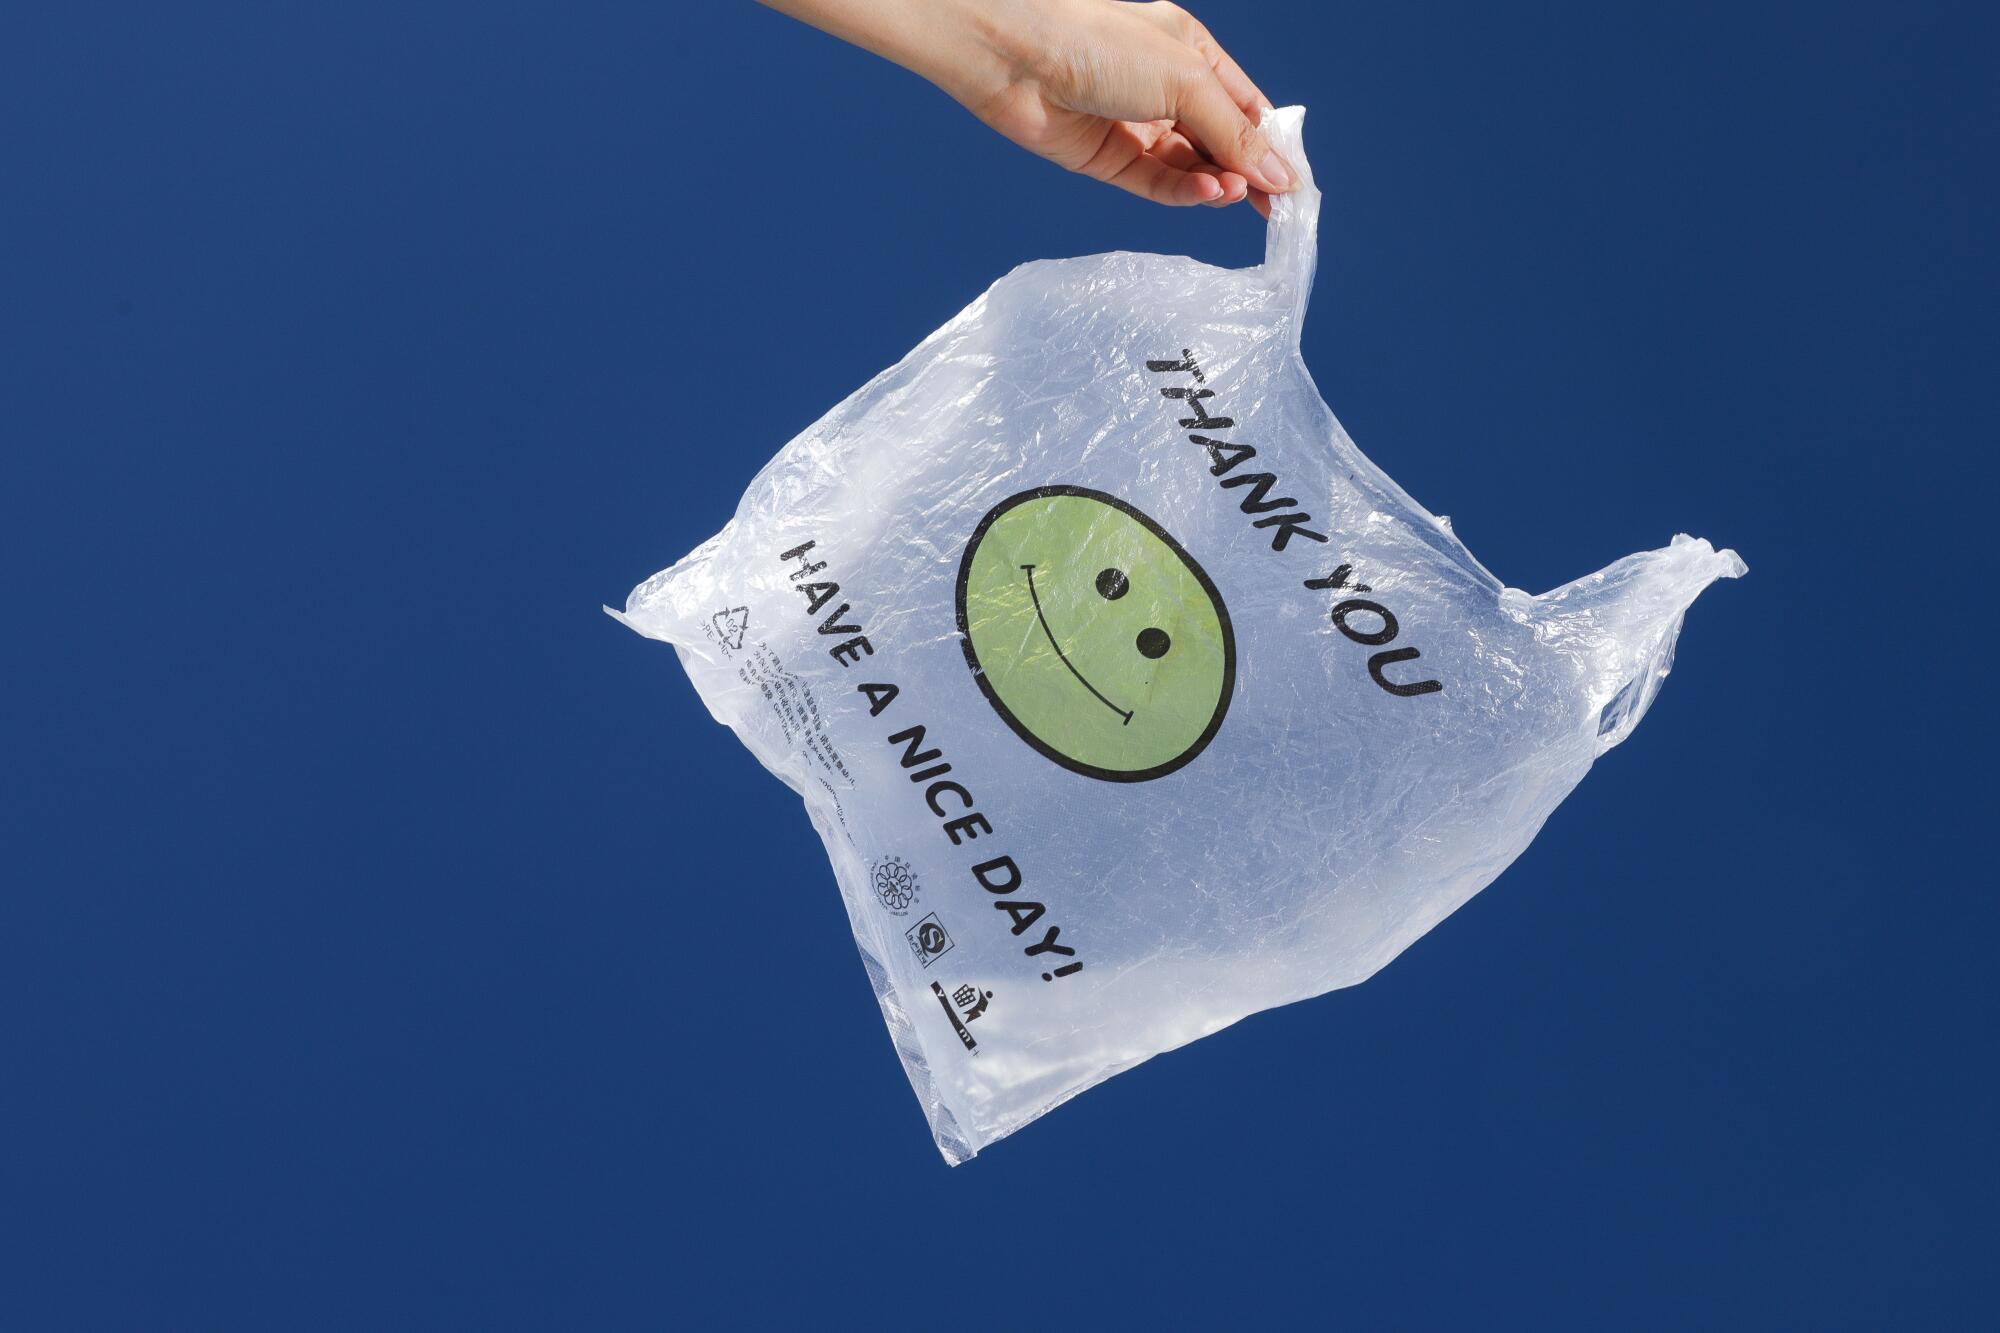 A plastic bag with a smiley face says "Have a nice day"